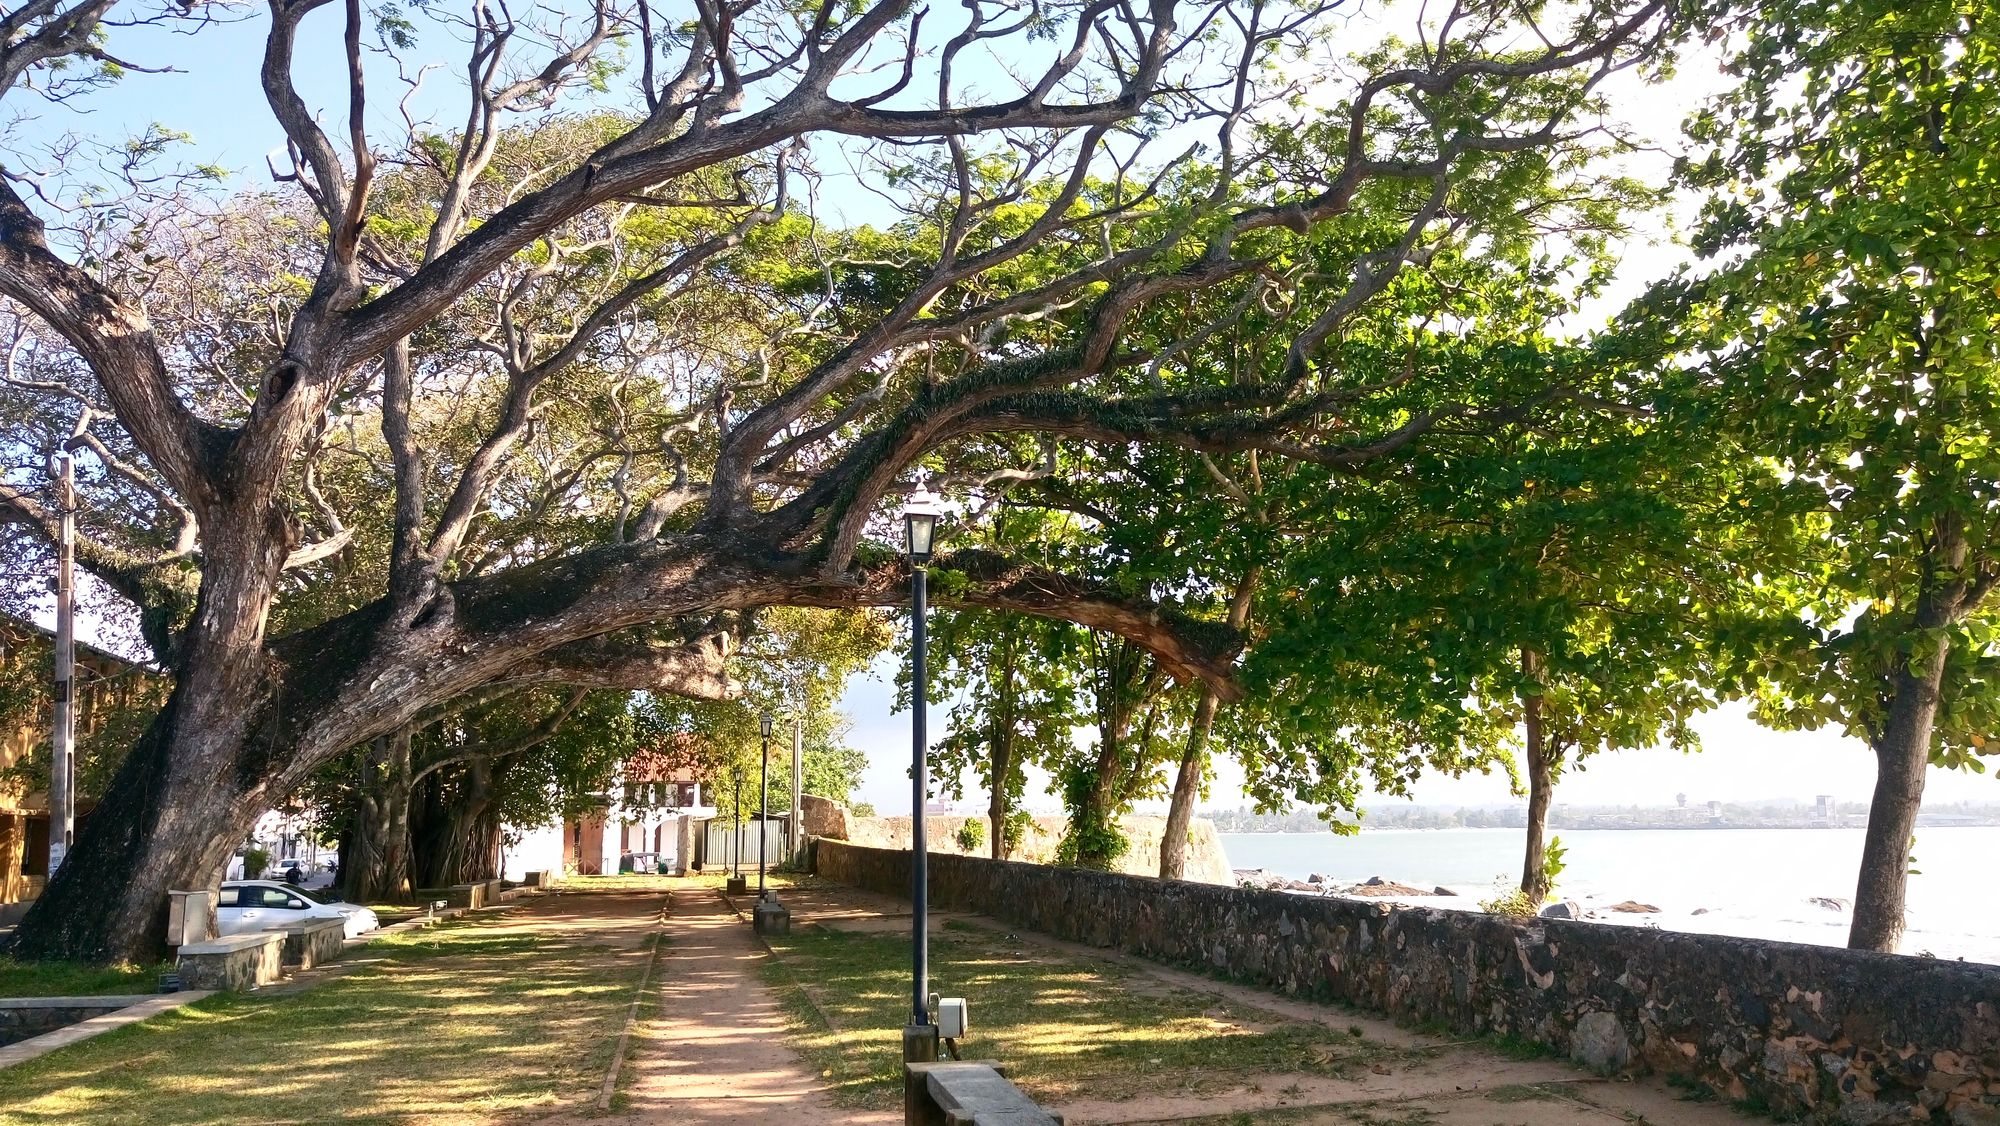 Ramparts of the Galle Dutch Fort, Sri Lanka, with a large tree arching over the pathway.